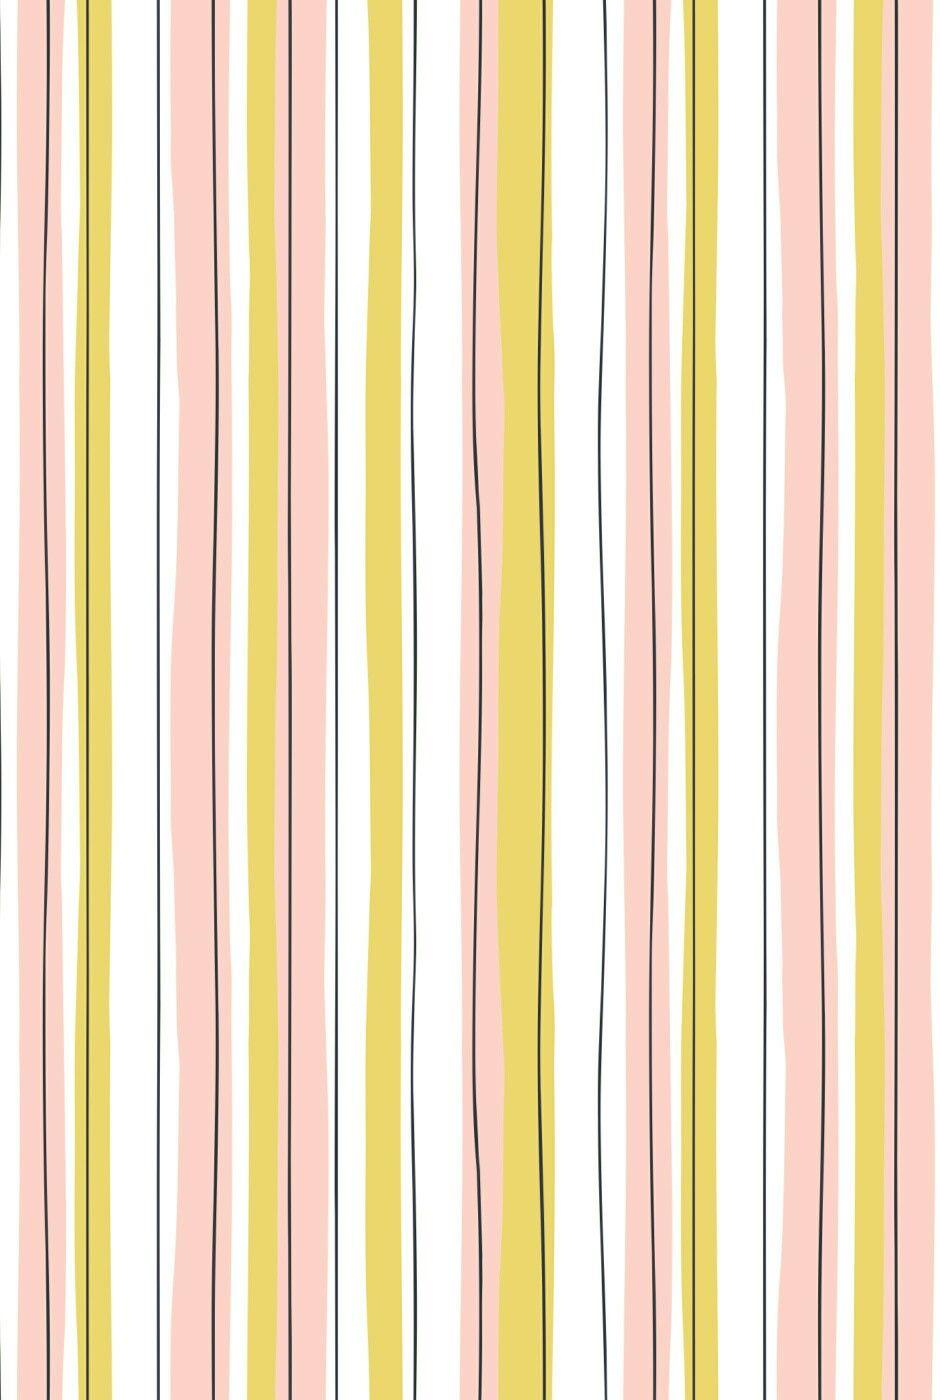 Yellow and pink stripes. Homescreen wallpaper, Striped